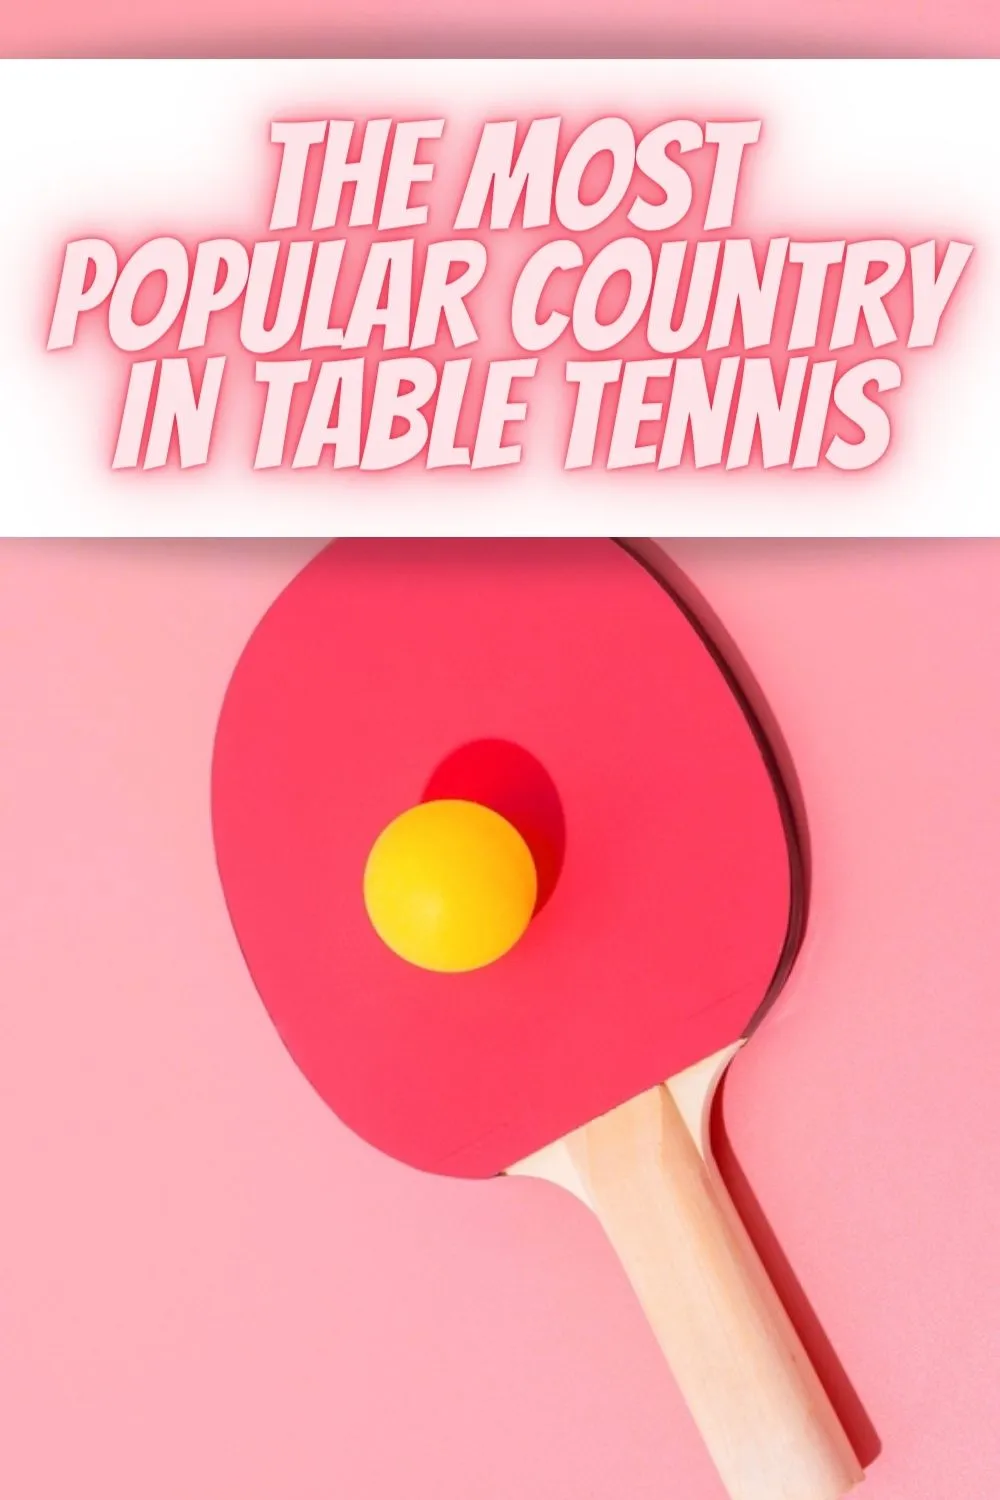 The Most Popular Country in Table Tennis